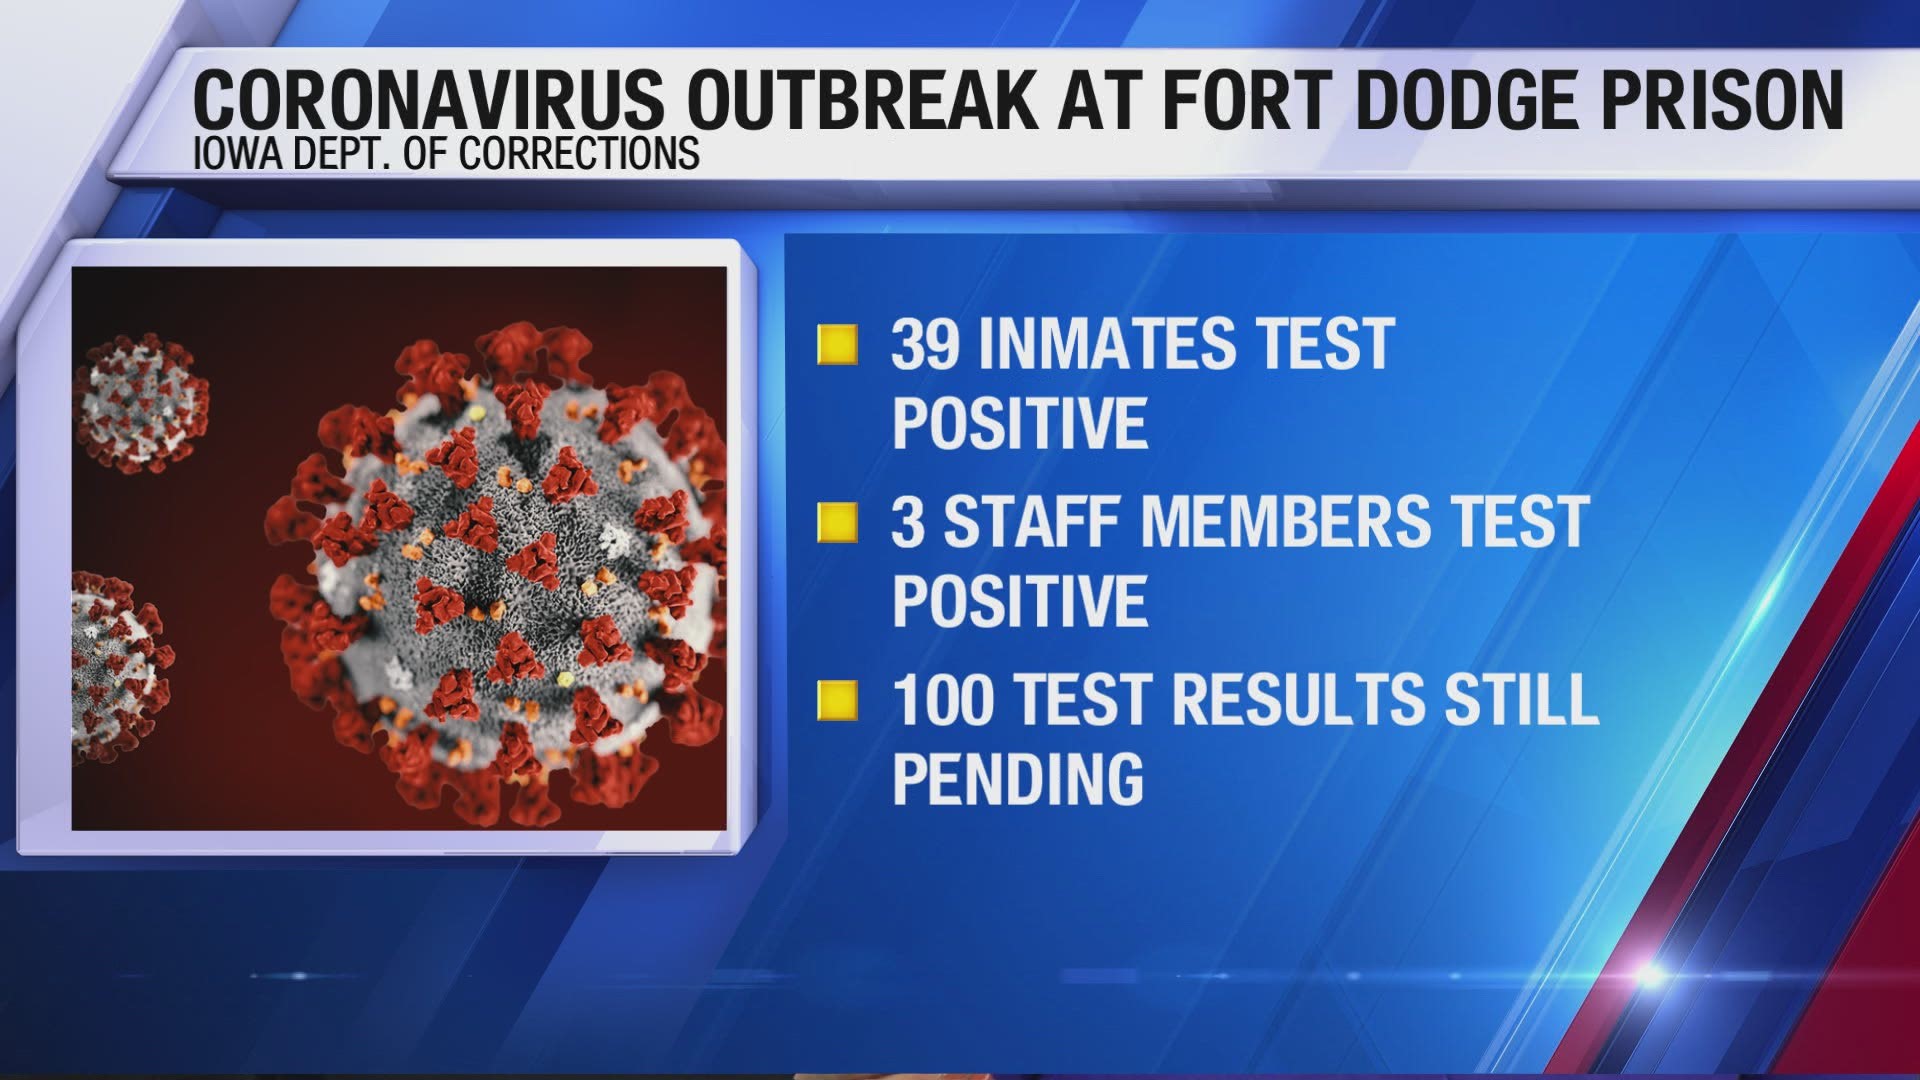 A total of 39 inmates and five staff members tested positive for the virus, according to the Iowa Department of Corrections.